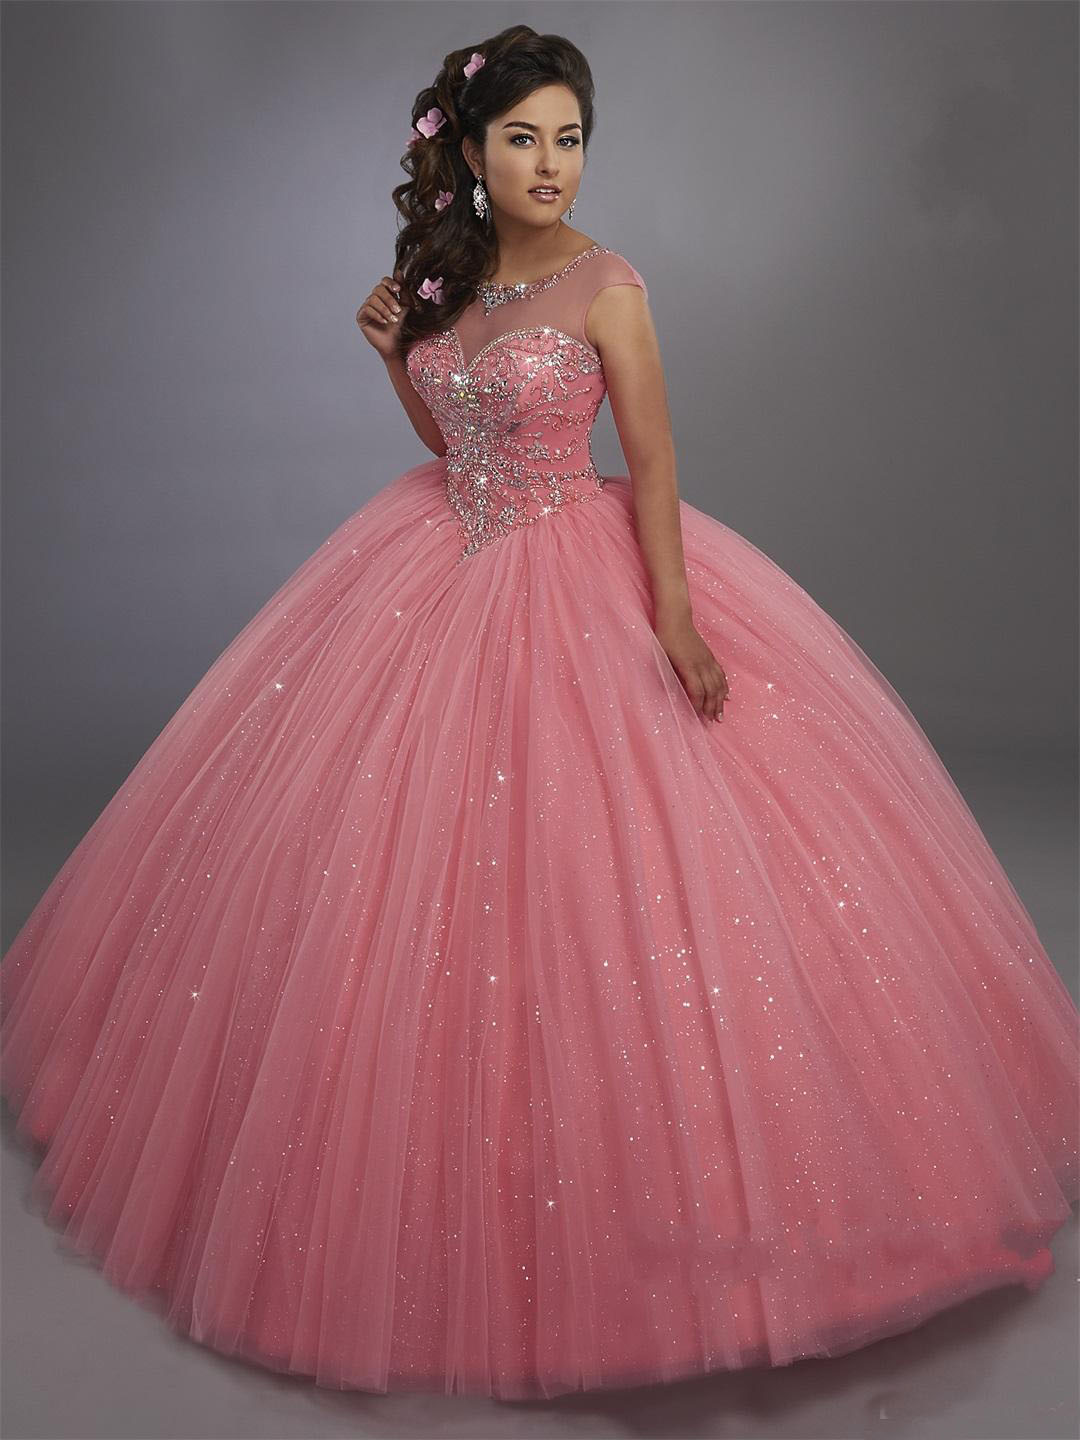 

2020 Calypso Ball Gown Quinceanera Dresses Illusion Scoop Neck and Lace Up Back Bling Bling Crystals Sweet 15 Dress Pageant Party Dresses, Orange